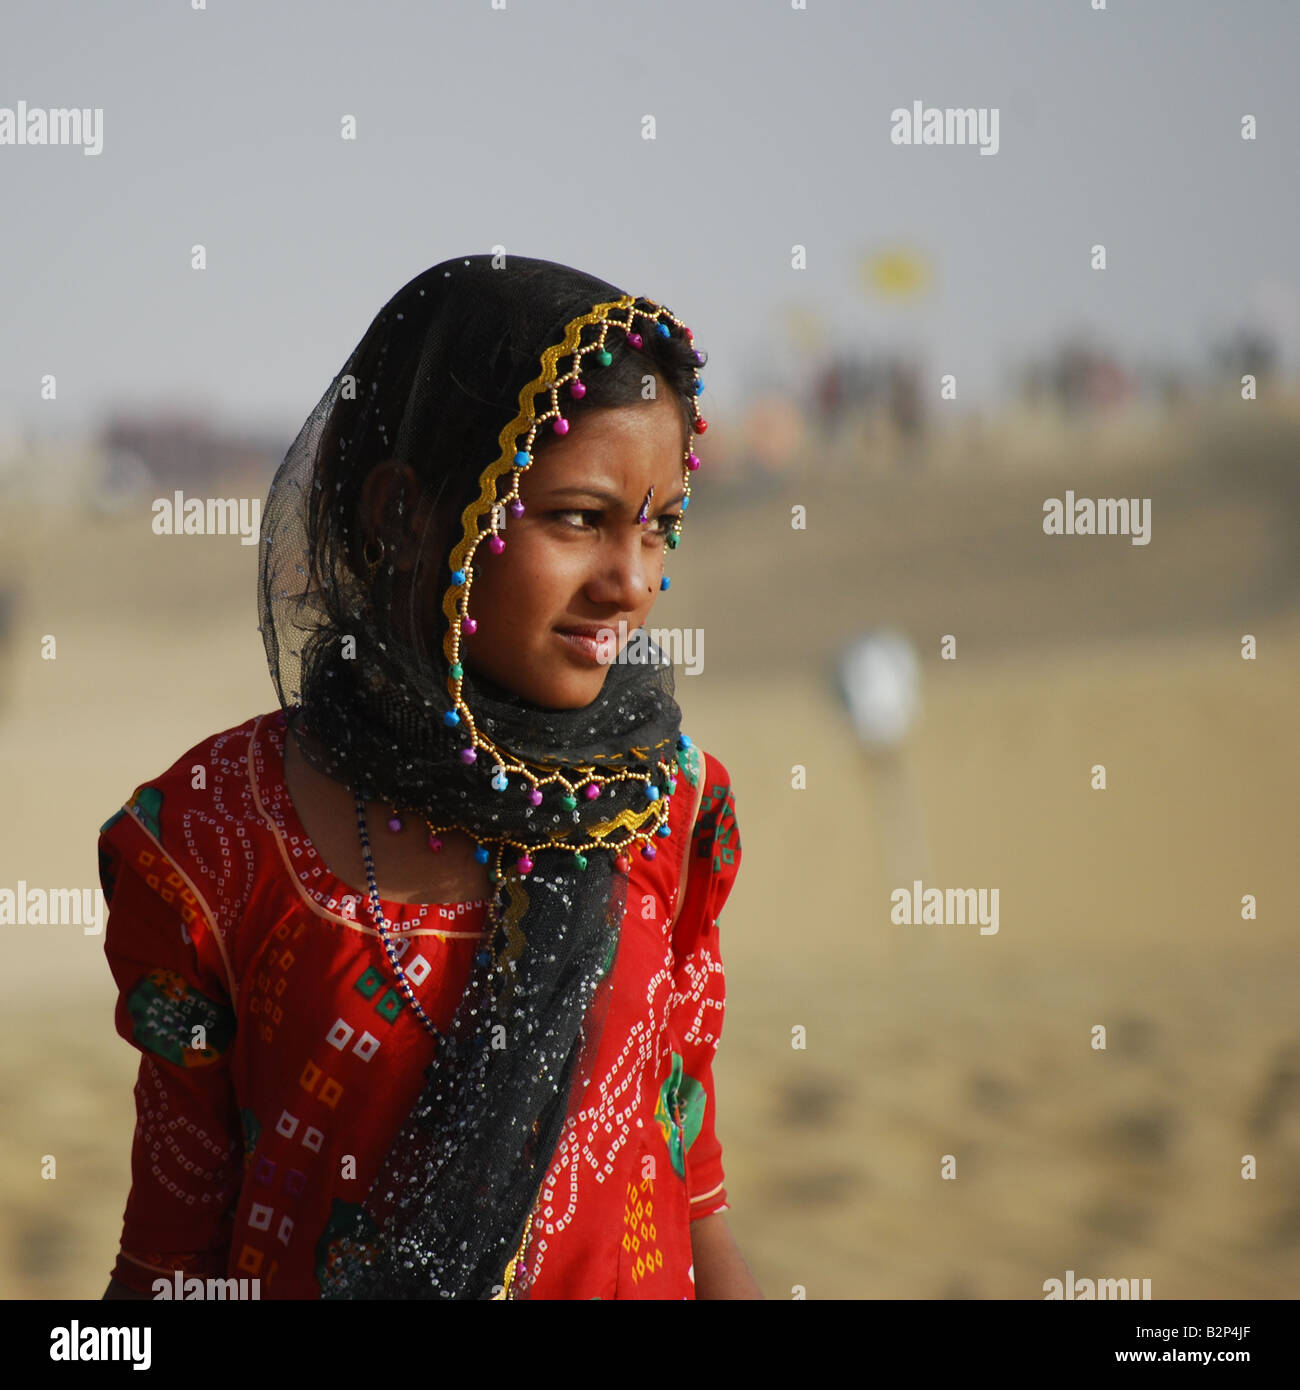 A young Indian woman in colourful traditional clothing at the Camel Festival in The Great Thar Desert, Jaisalmer, India. Stock Photo